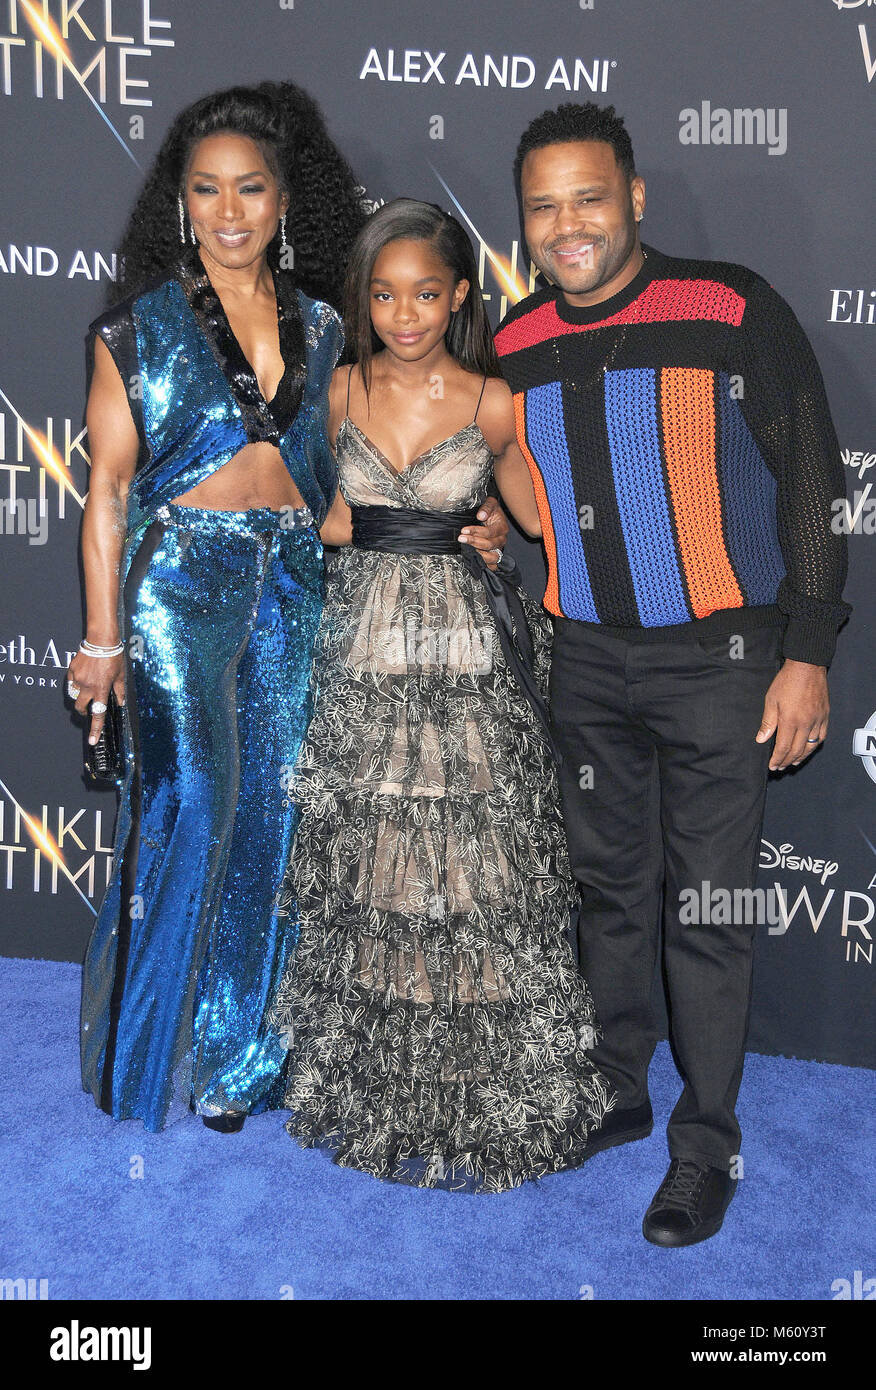 Los Angeles, California, USA. 26th Feb, 2018. February 26h 2018 - Los Angeles, California USA - Actress ANGELA BASSETT, Actress MARSAI MARTIN, Actor ANTHONY ANDERSON at the ''A Wrinkle In Time'' Premiere held at the El Capitan Theater, Hollywood, Los Angeles. Credit: Paul Fenton/ZUMA Wire/Alamy Live News Stock Photo